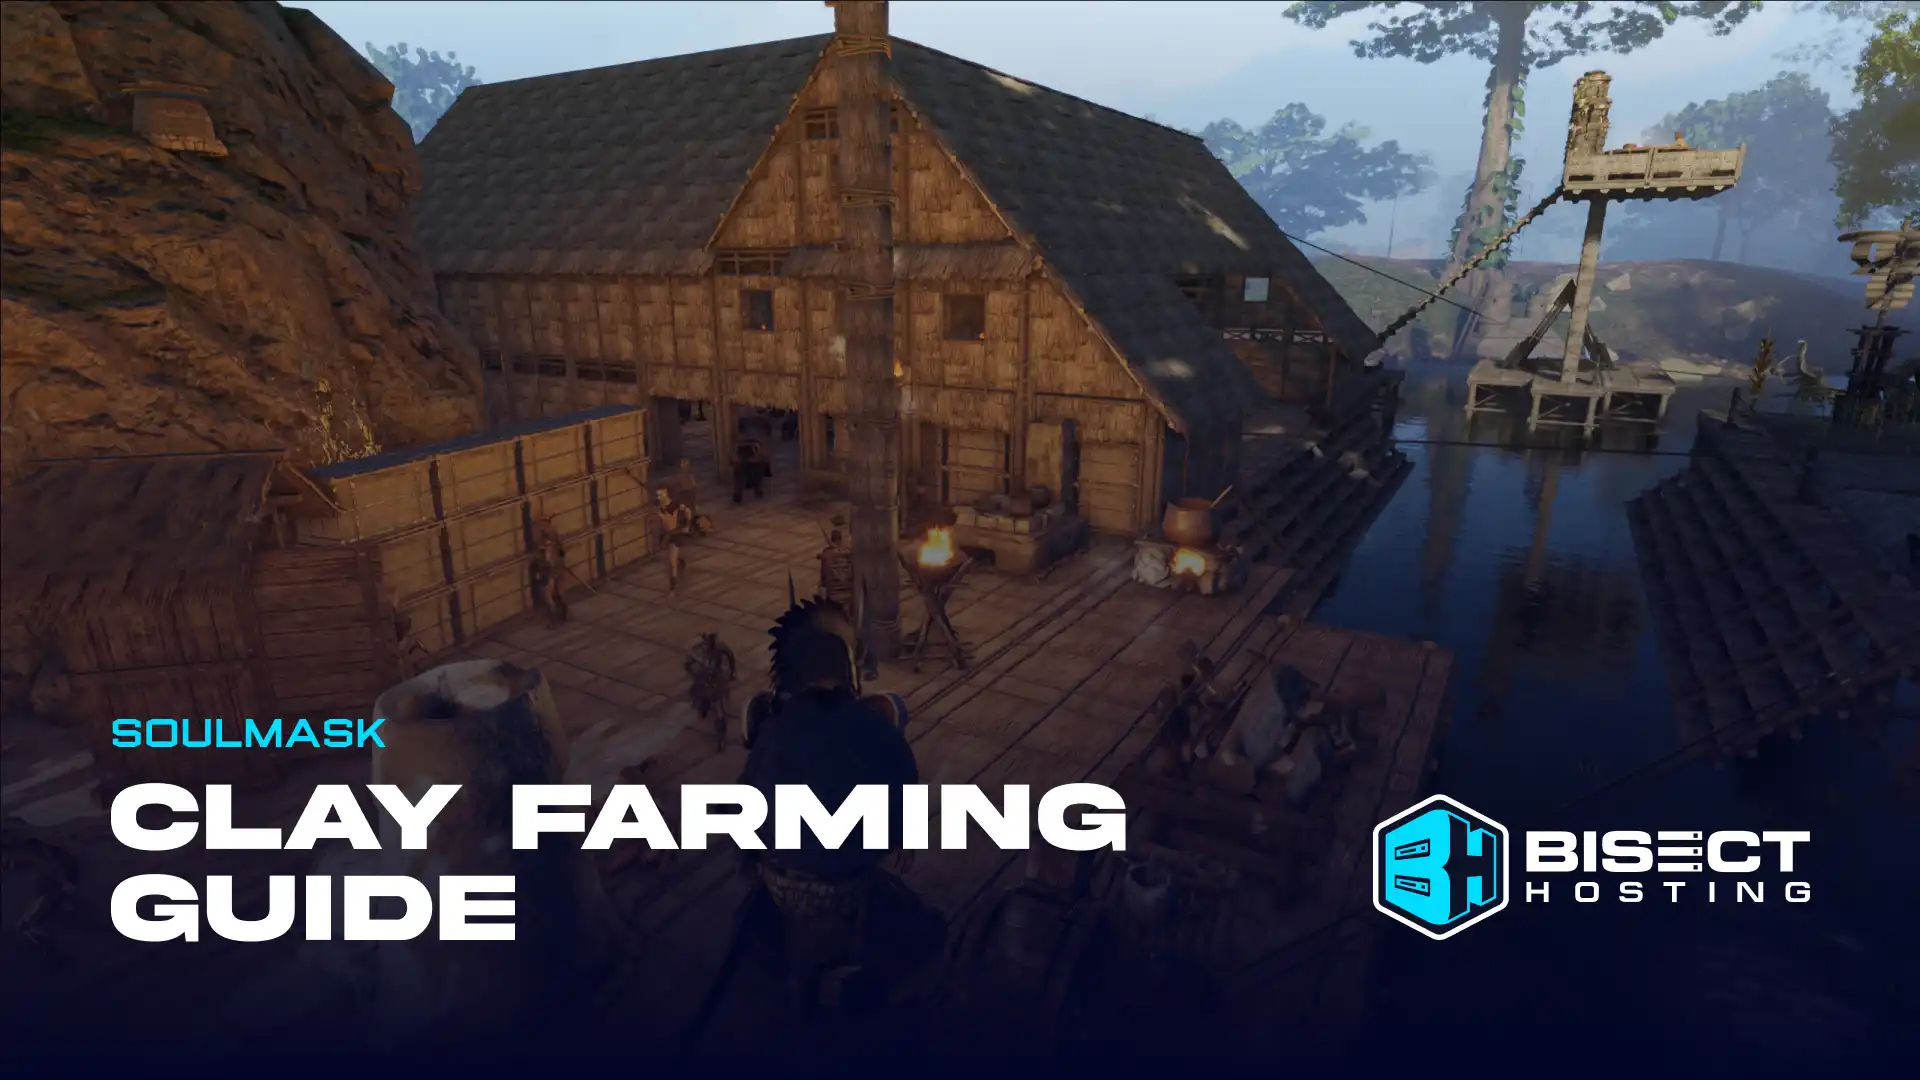 Soulmask Clay Farming Guide: Locations & All Crafting Recipes